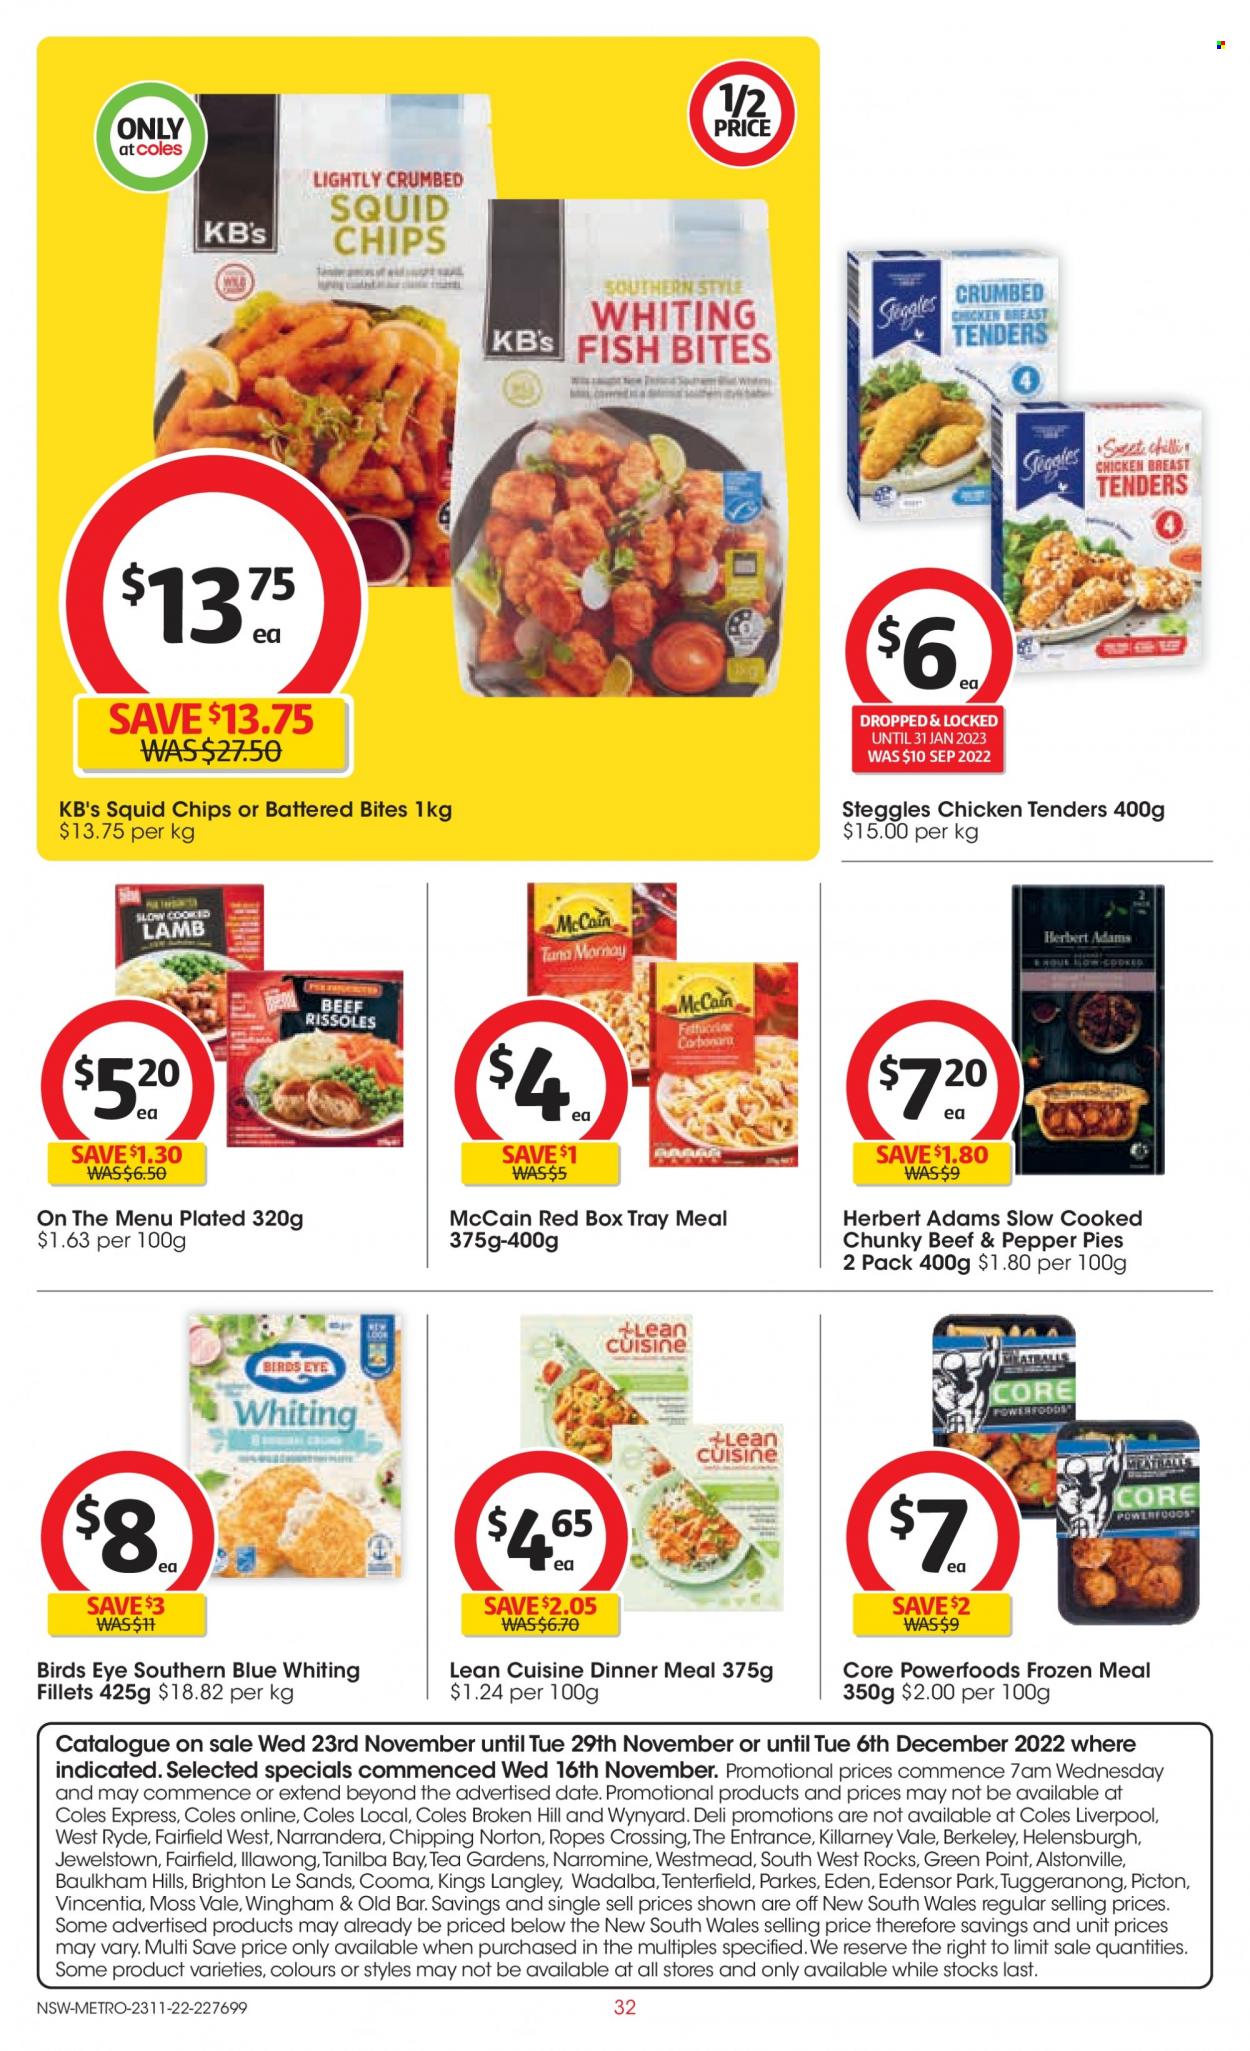 thumbnail - Coles Catalogue - 23 Nov 2022 - 29 Nov 2022 - Sales products - squid, fish, whiting fillets, whiting, chicken tenders, meatballs, Bird's Eye, Lean Cuisine, McCain, tea, tray, Hill's. Page 32.